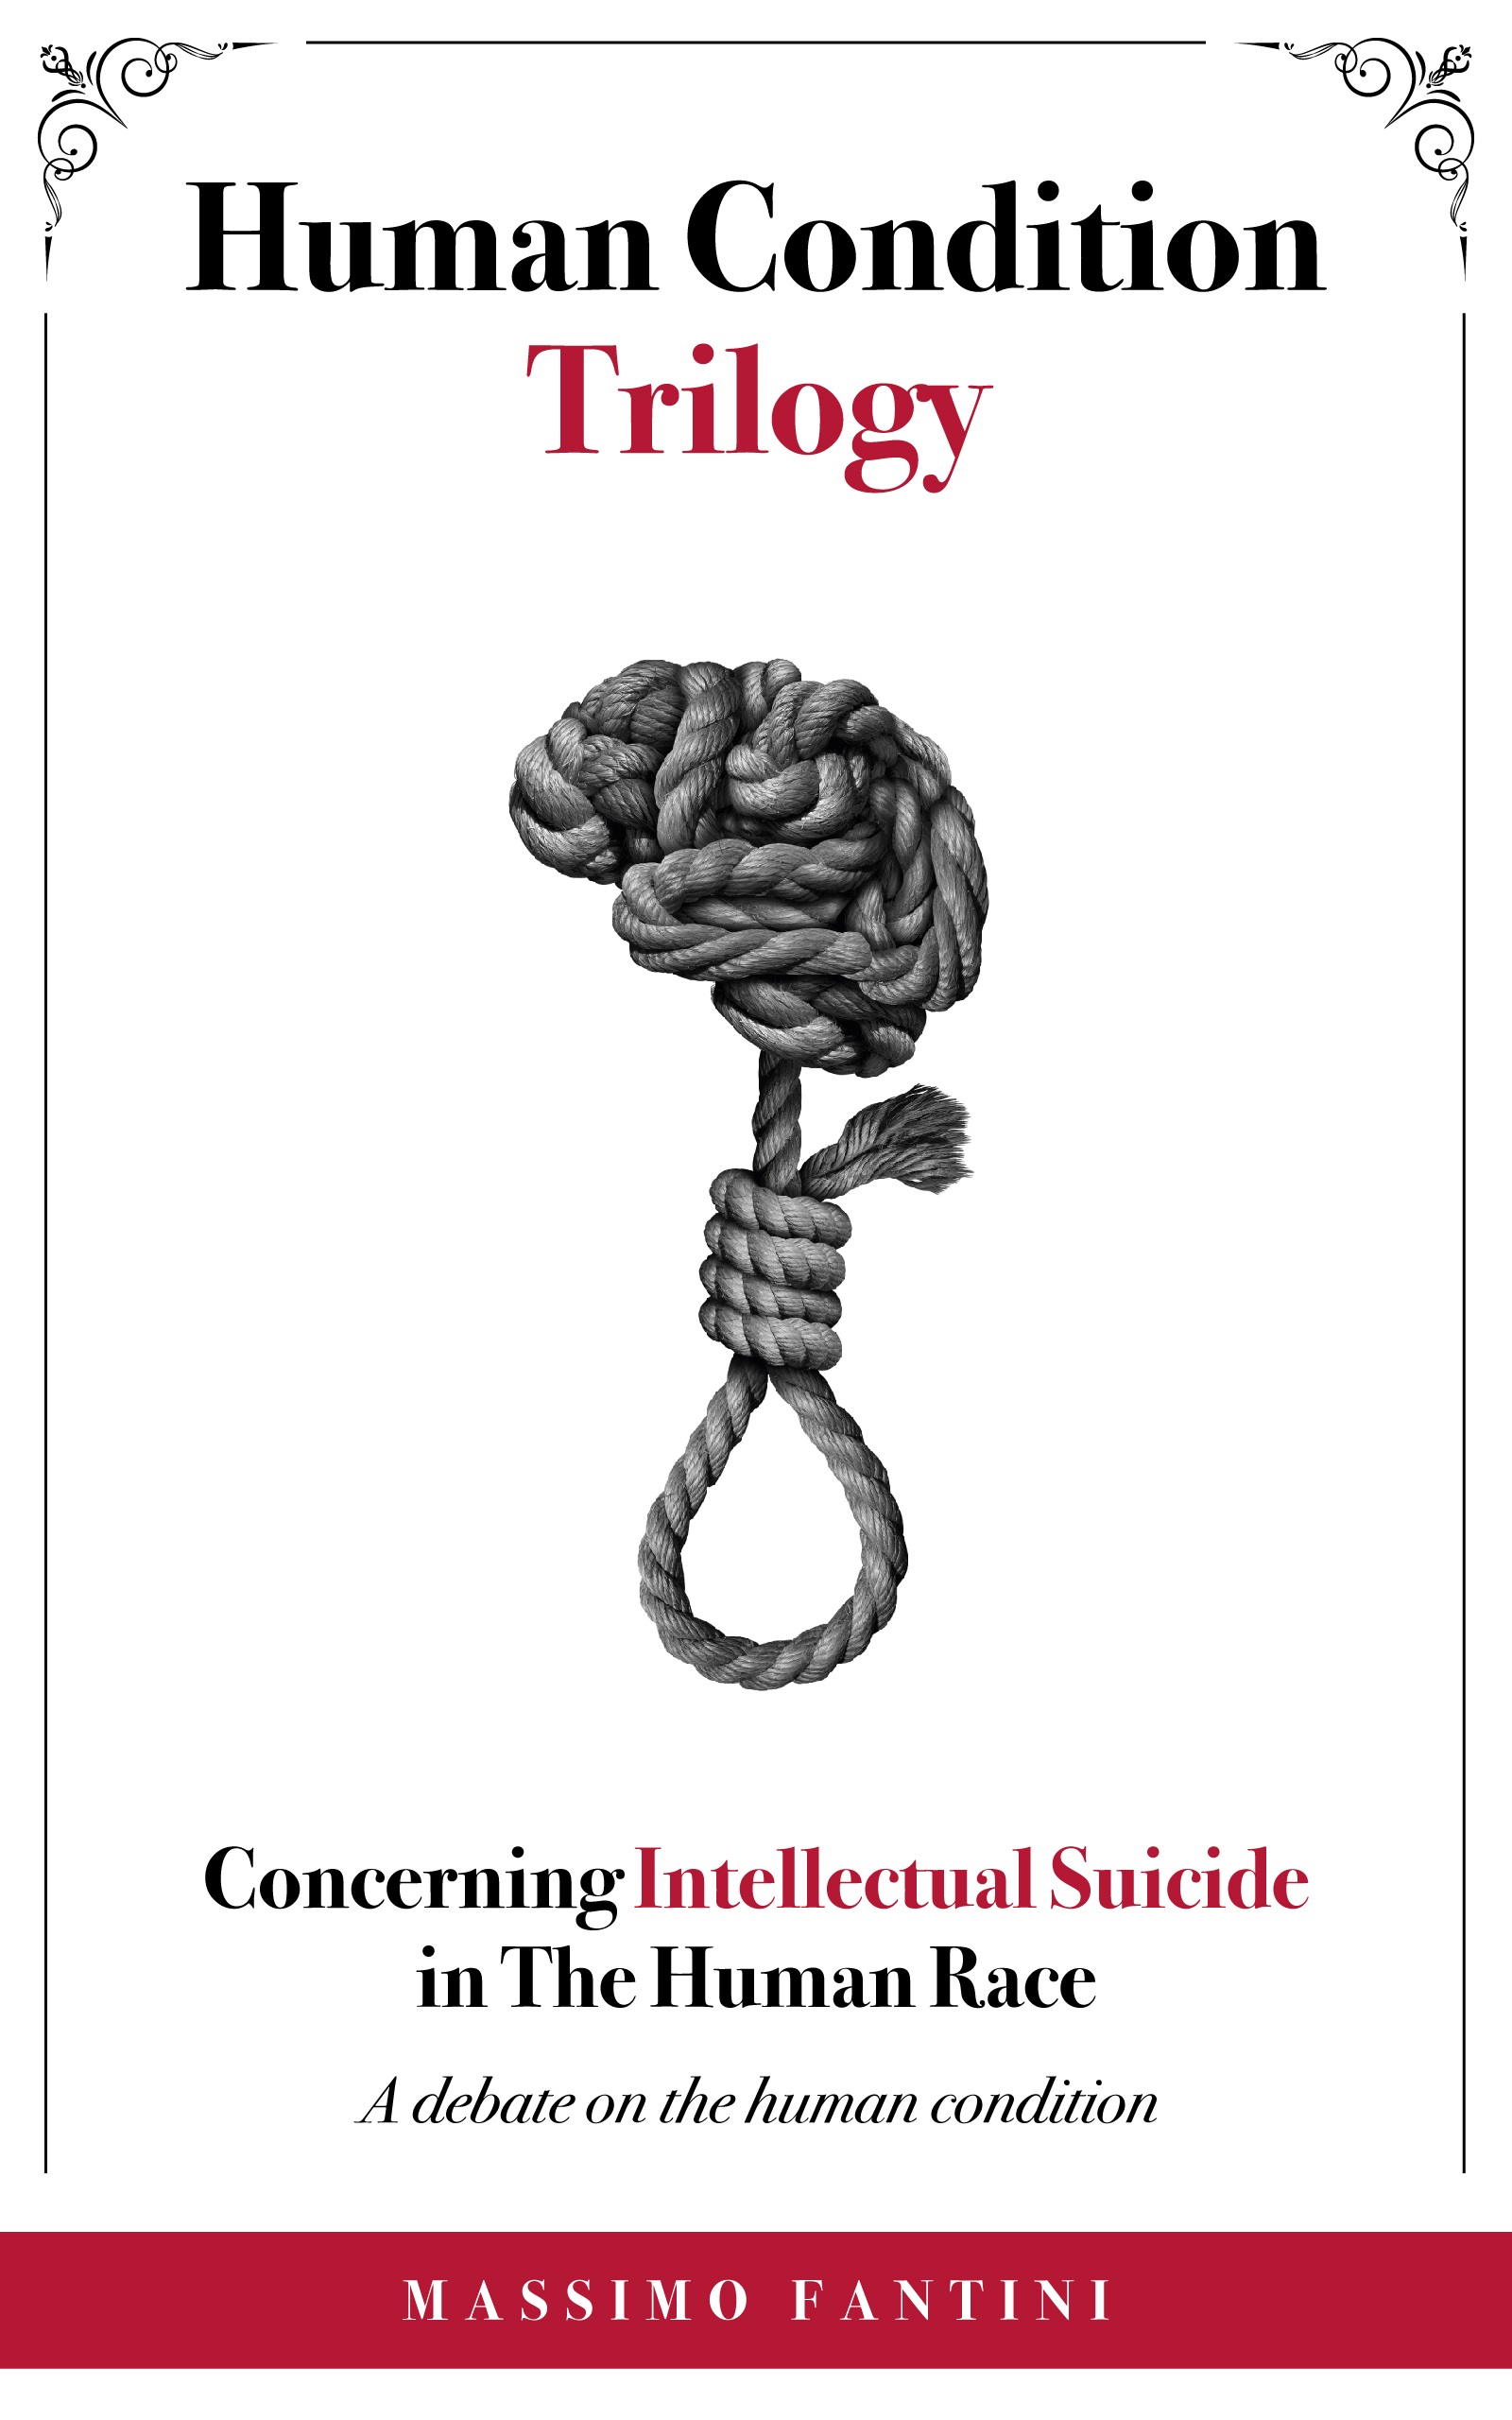 Concerning Intellectual Suicide in the Human Race by Massimo Fantini